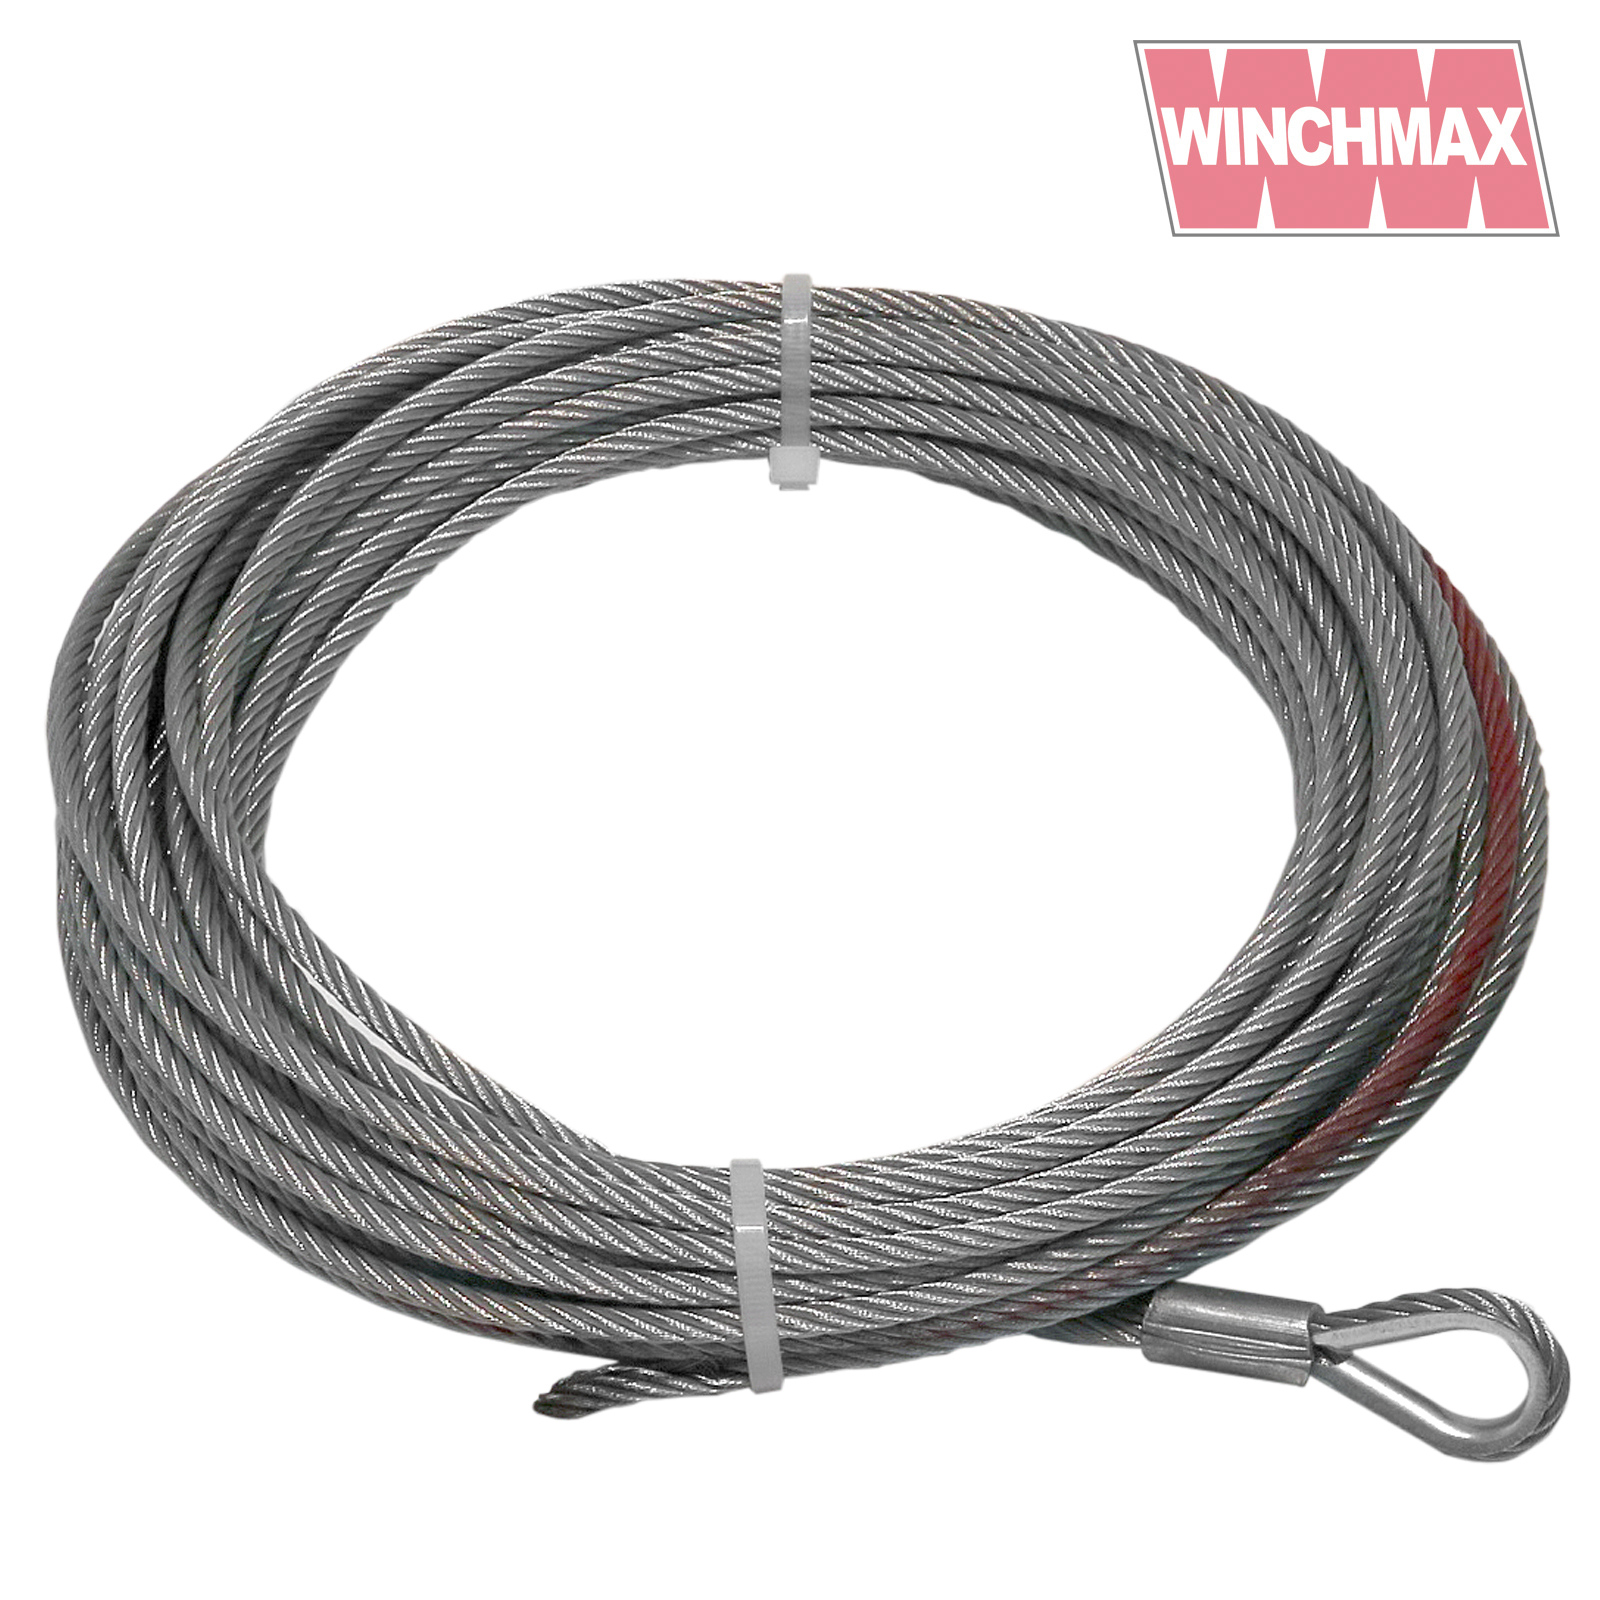 Steel Rope 15m x 5mm, Hole Fix. 1/4 inch Clevis Hook. For winches